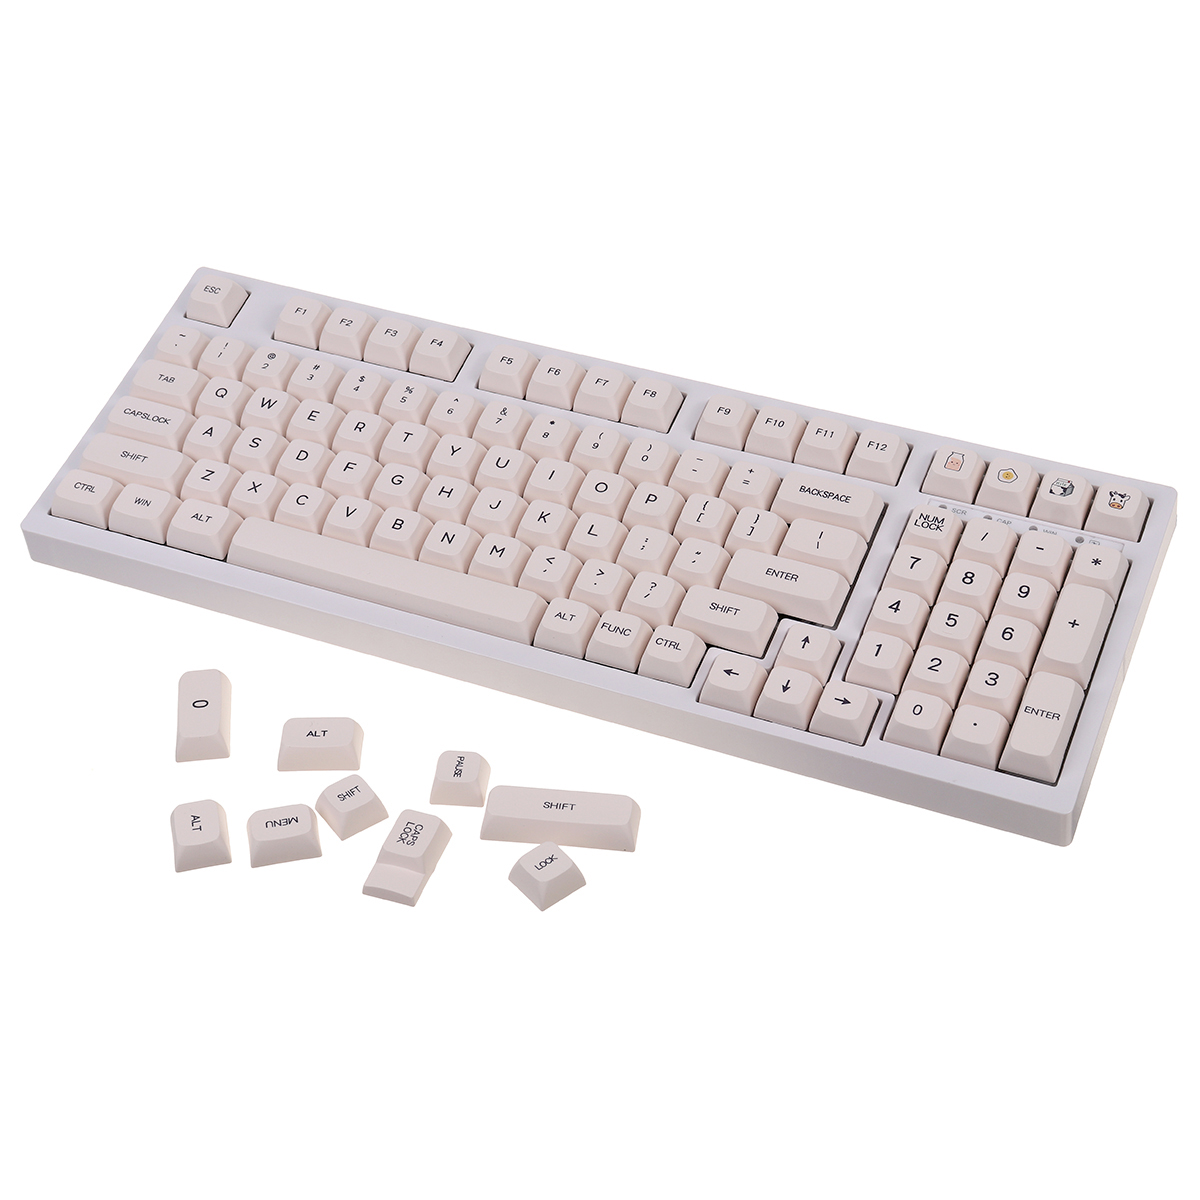 Find 124 Keys Milk PBT Keycap Set Sublimation XDA Profile English/Japanese Custom Keycaps for Mechanical Keyboard for Sale on Gipsybee.com with cryptocurrencies